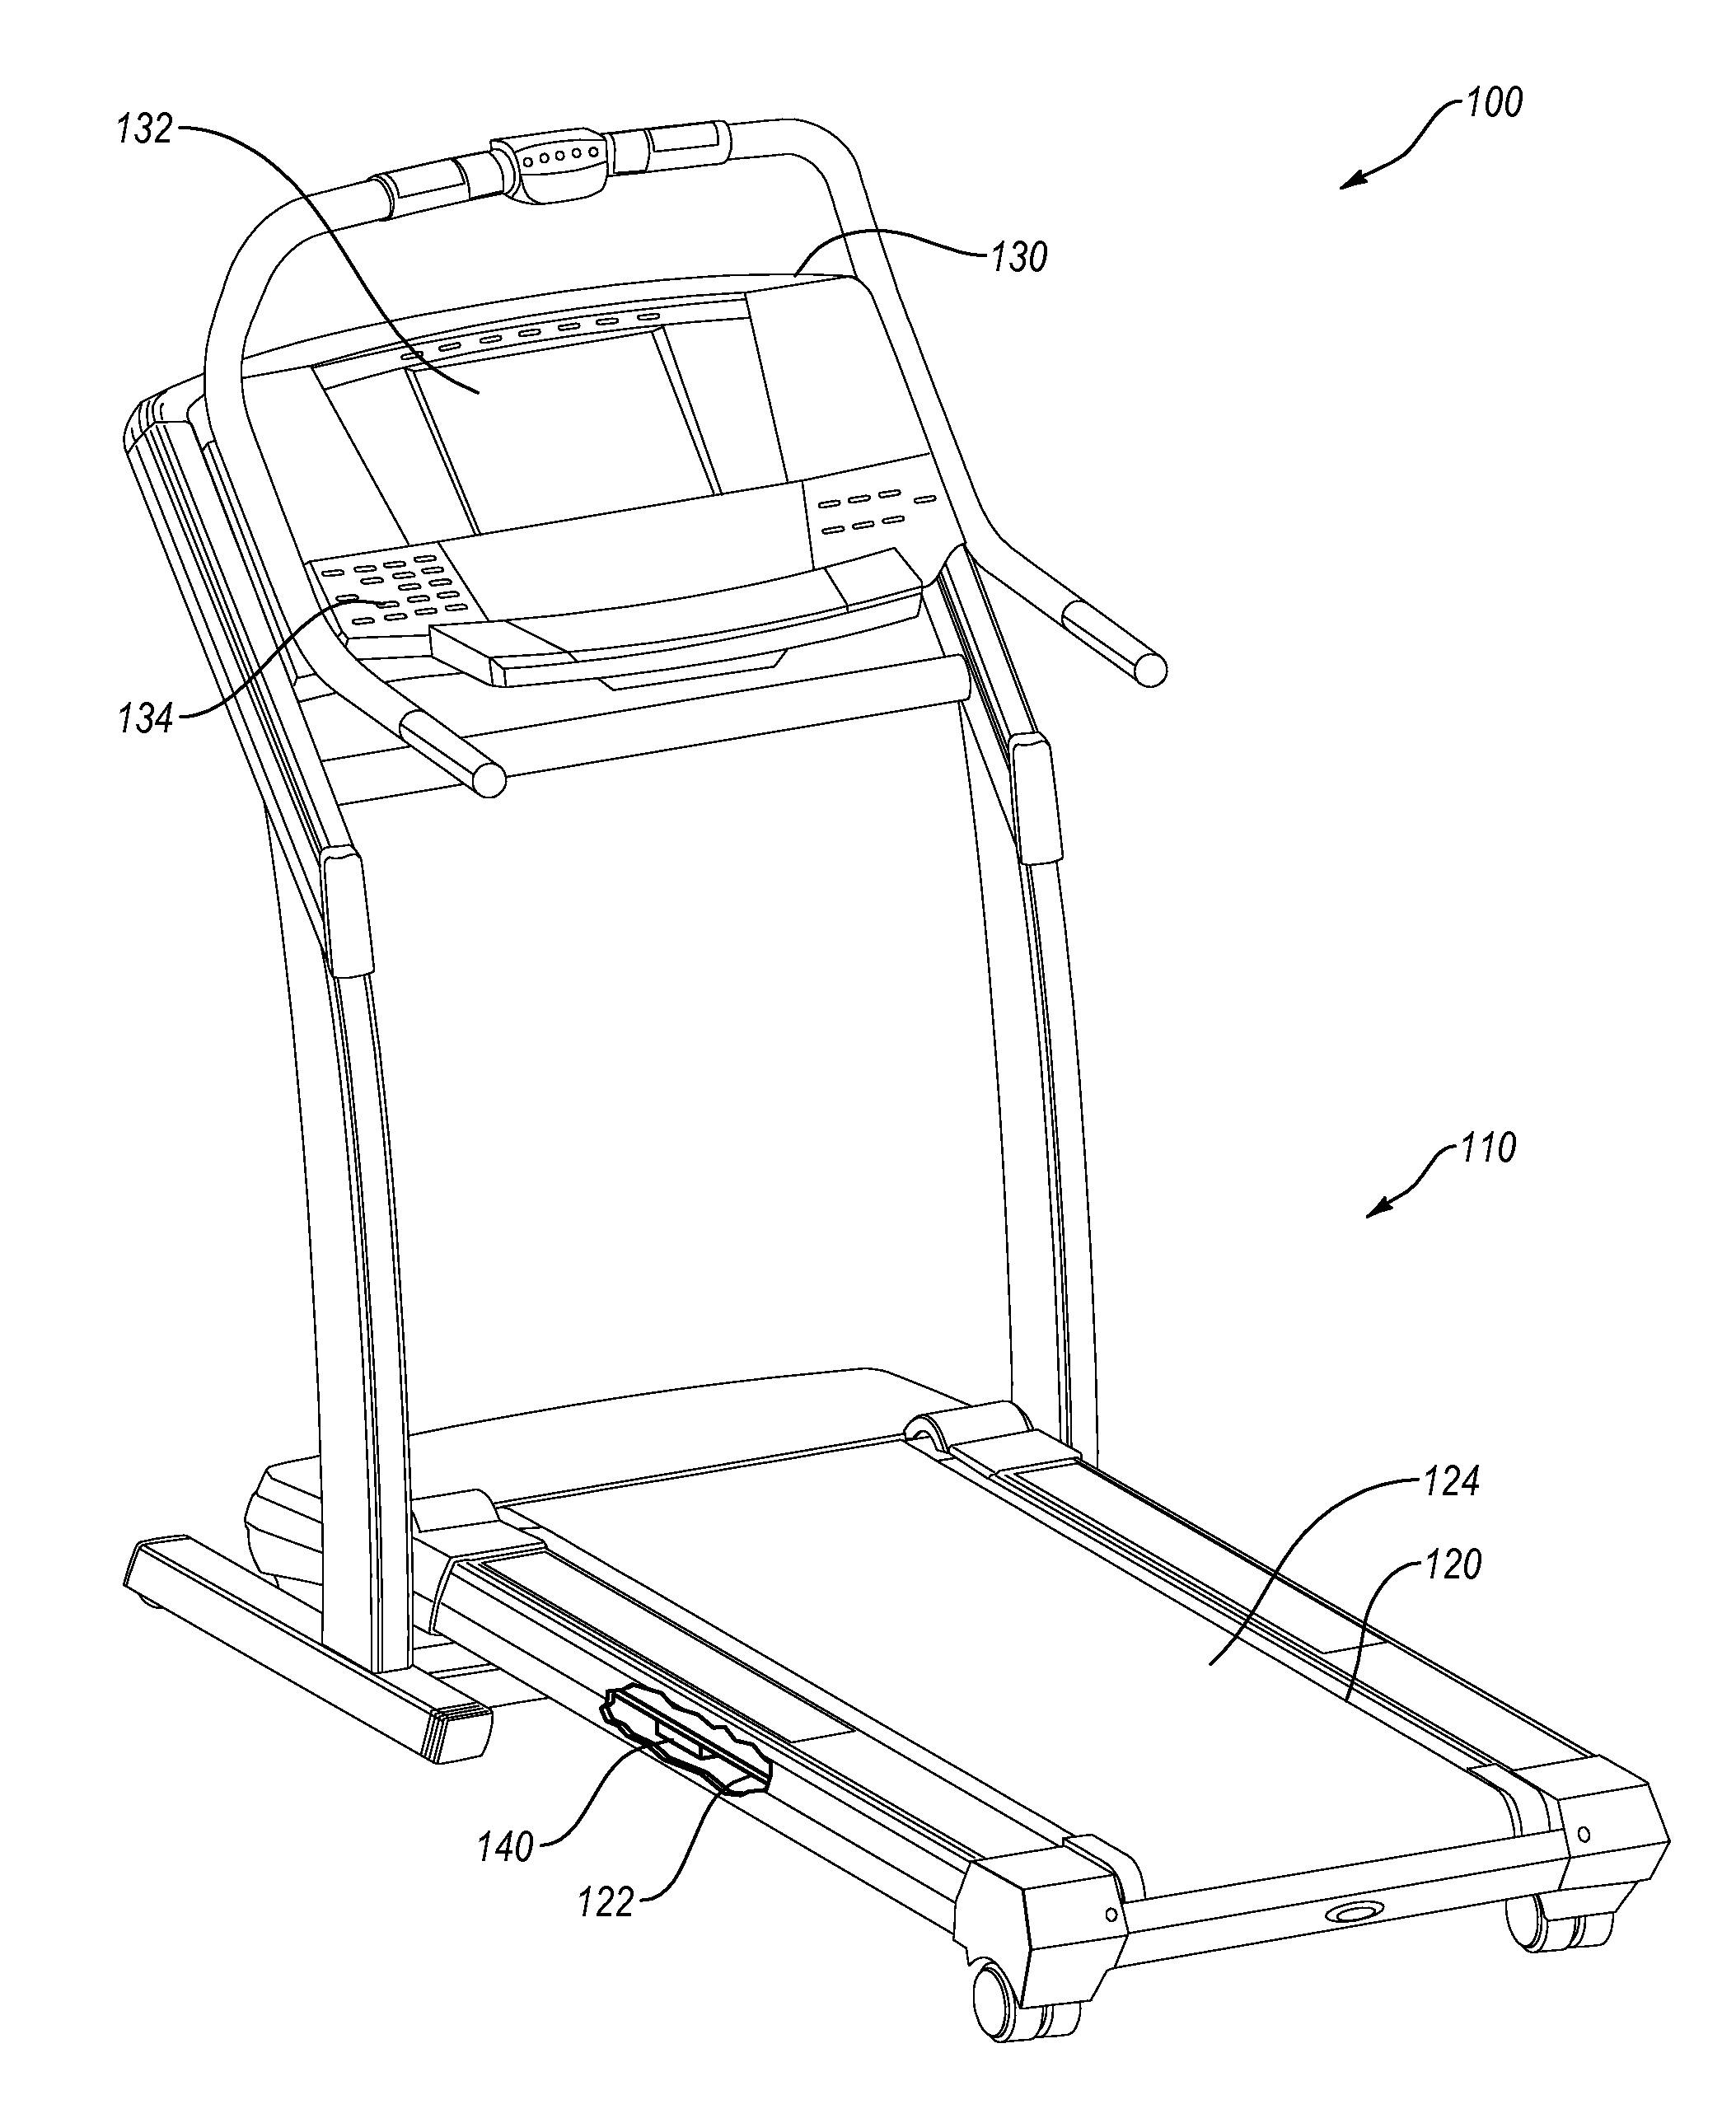 Treadmill with foot fall monitor and cadence display